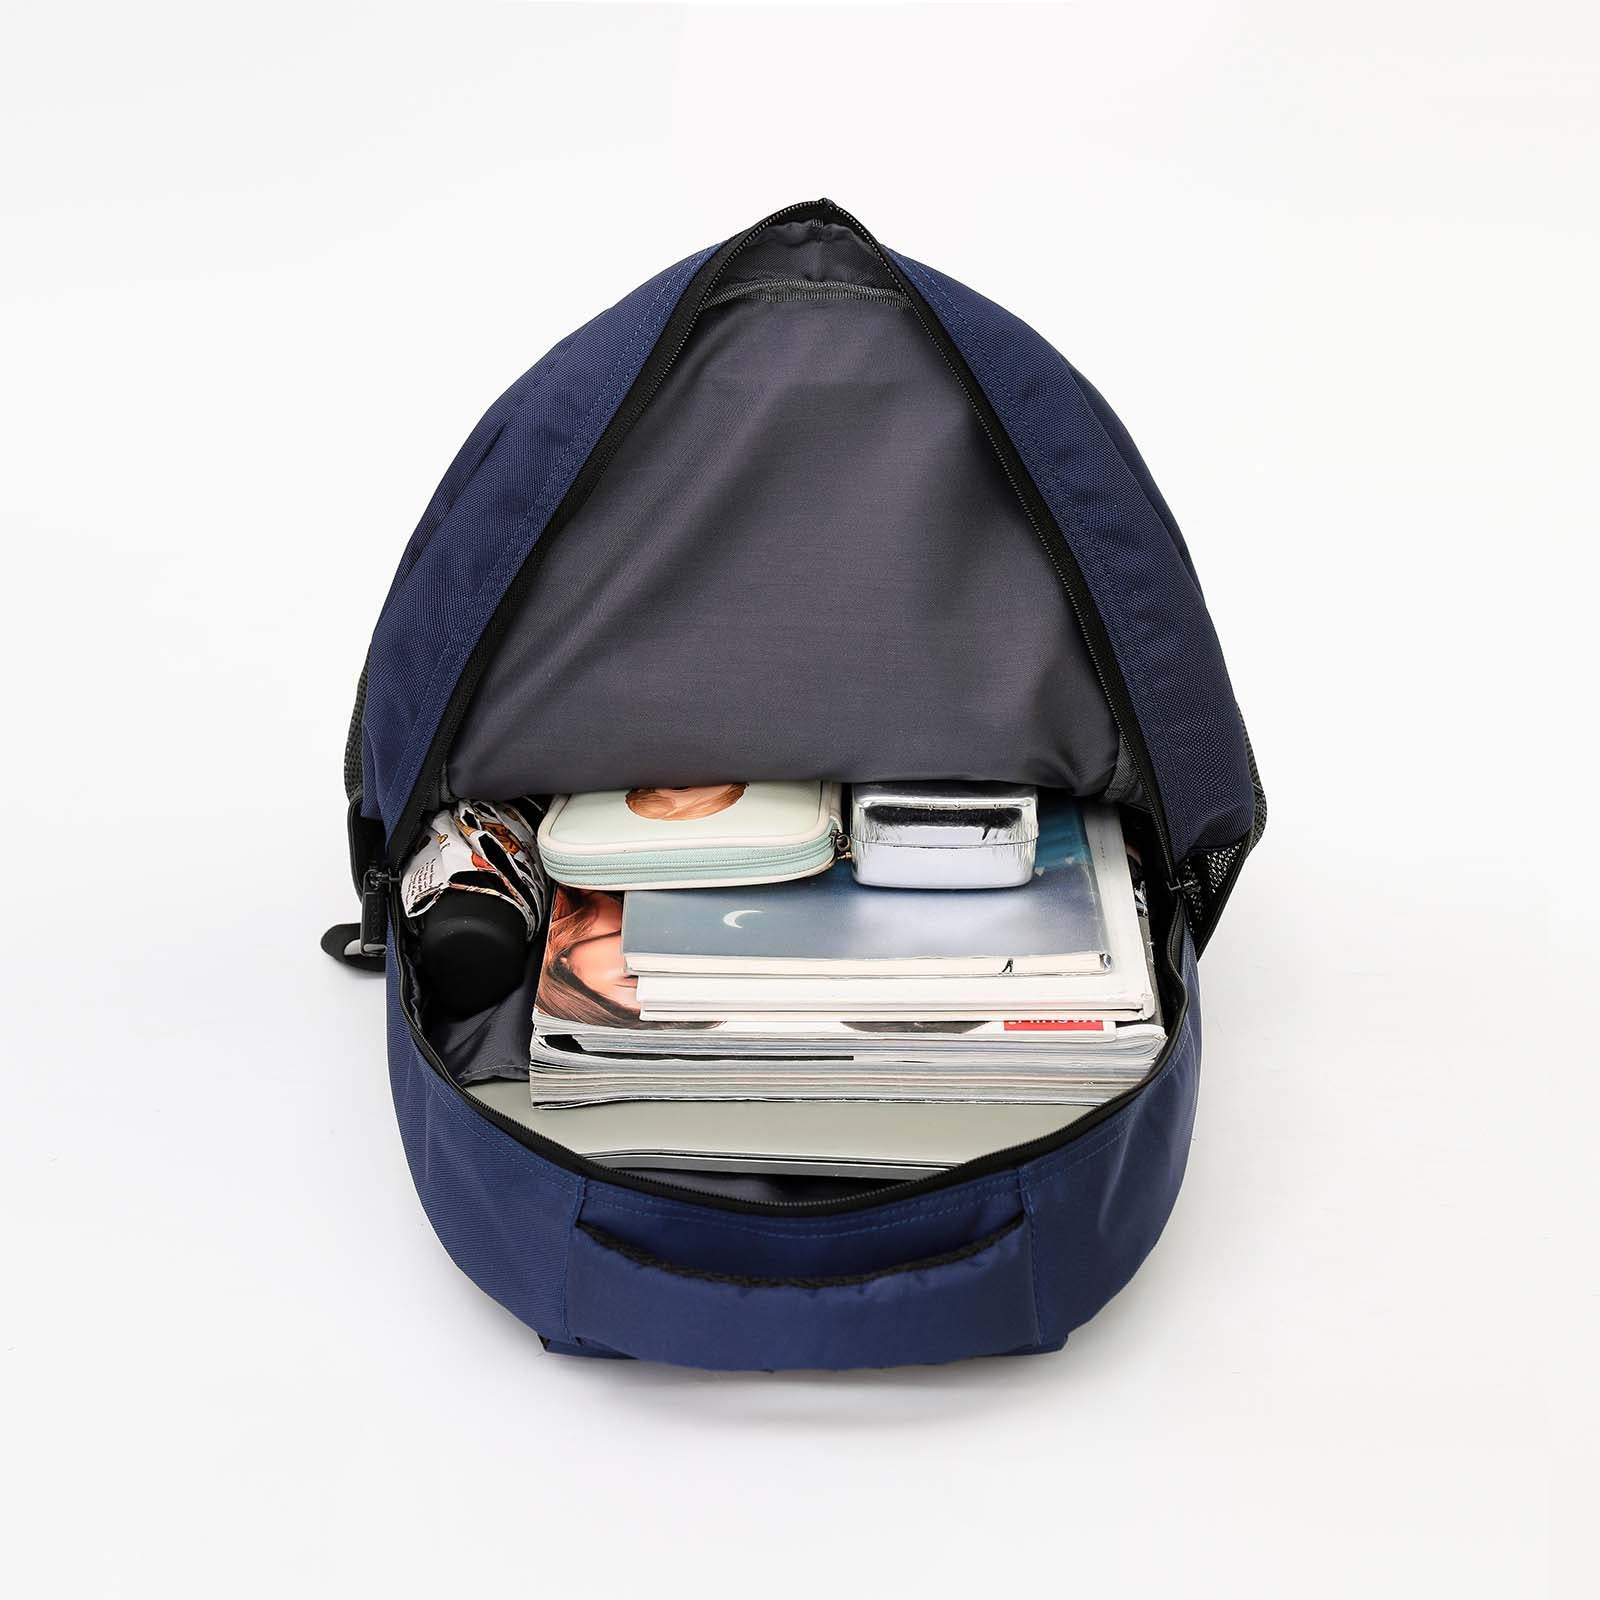 tosca-multi-compartment-laptop-backpack-35l-navy-open